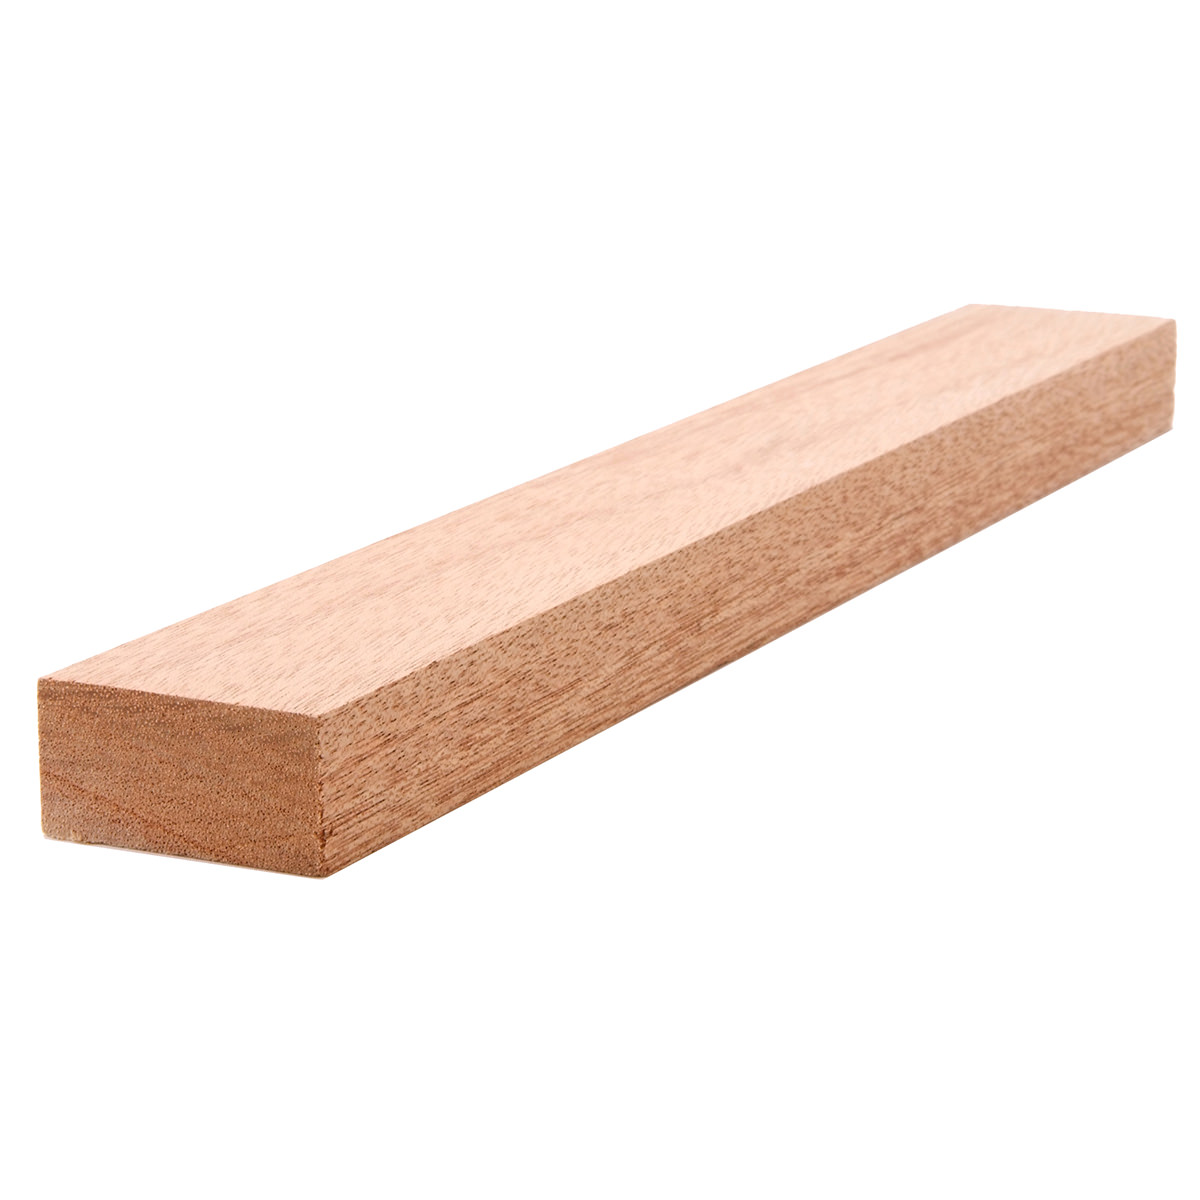 1x2 (3/4" x 11/2") African Mahogany S4S Lumber, Boards